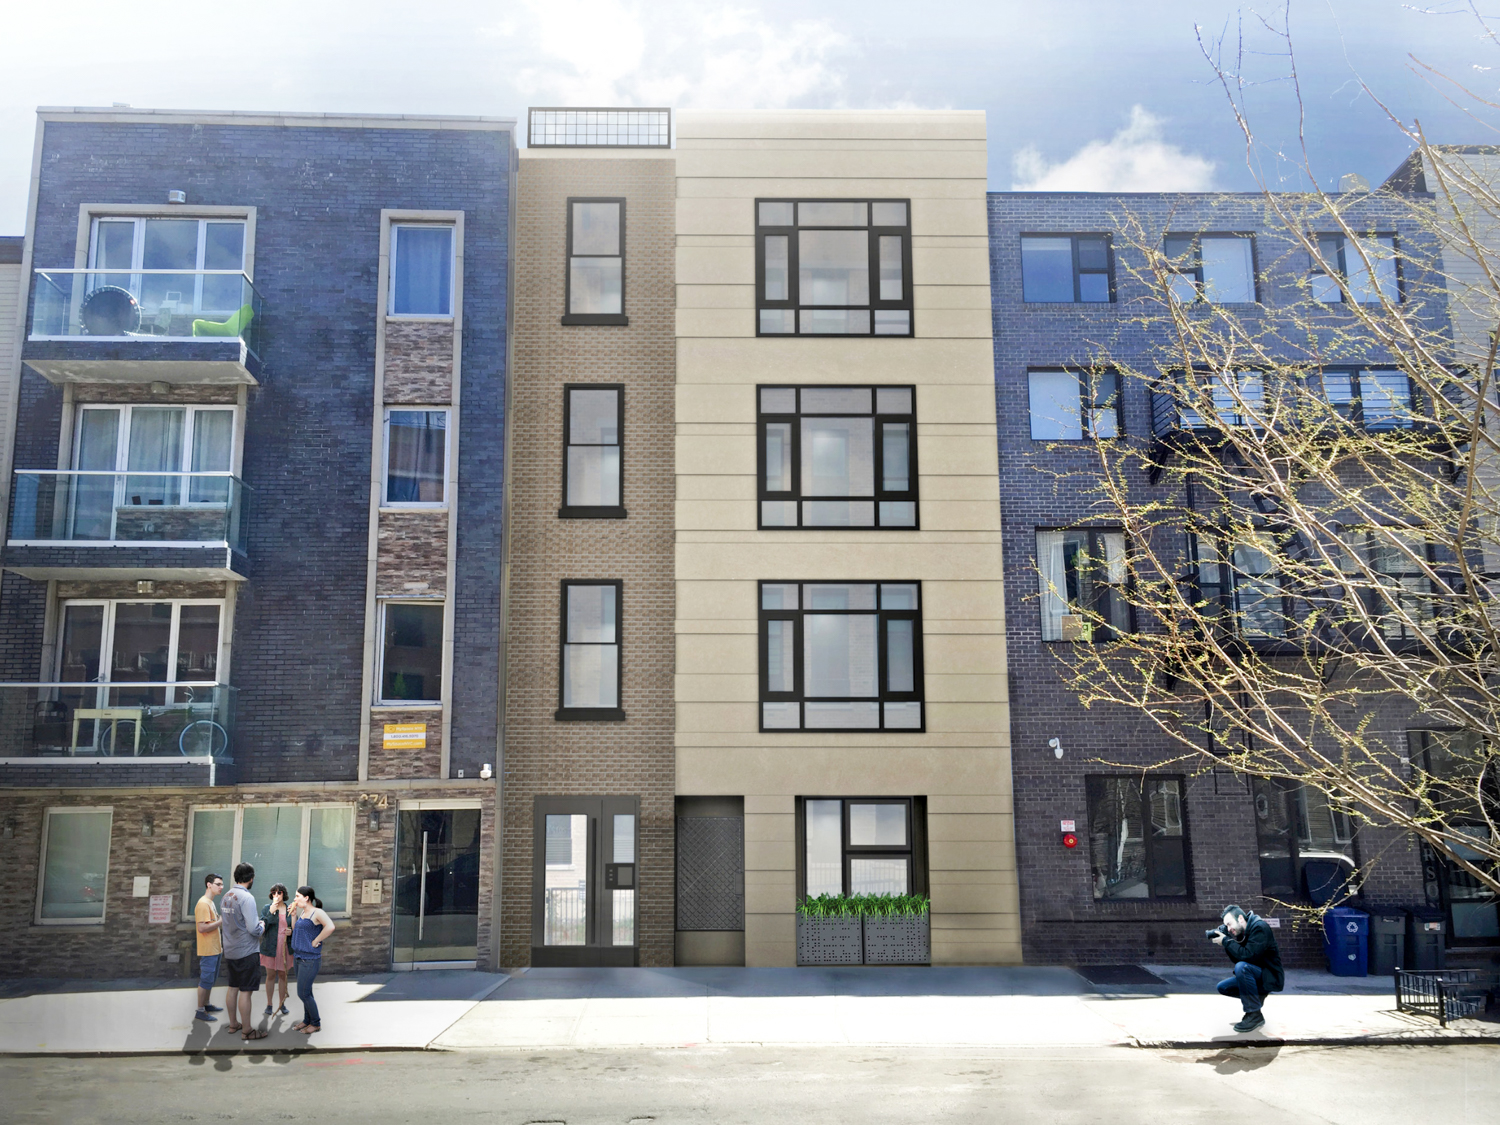 272 Jefferson Street surrounded by potential future development, rendering courtesy Stat Architecture